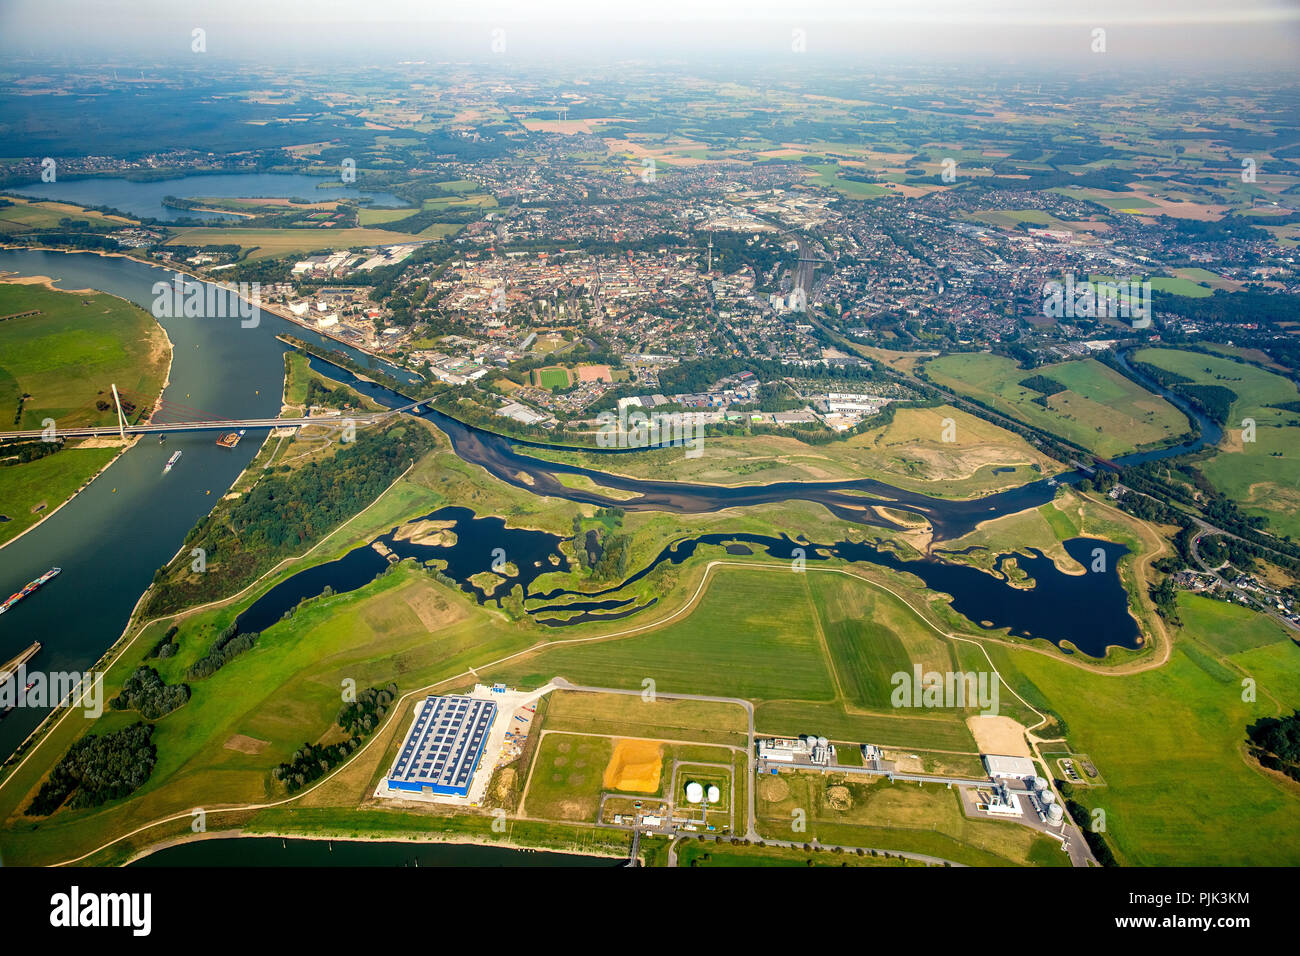 Aerial view, Lippe mouth, Lippe mouth delta, Lippe reconstruction, sand banks, Rhine, Wesel, Ruhr area, Lower Rhine, North Rhine-Westphalia, Germany Stock Photo